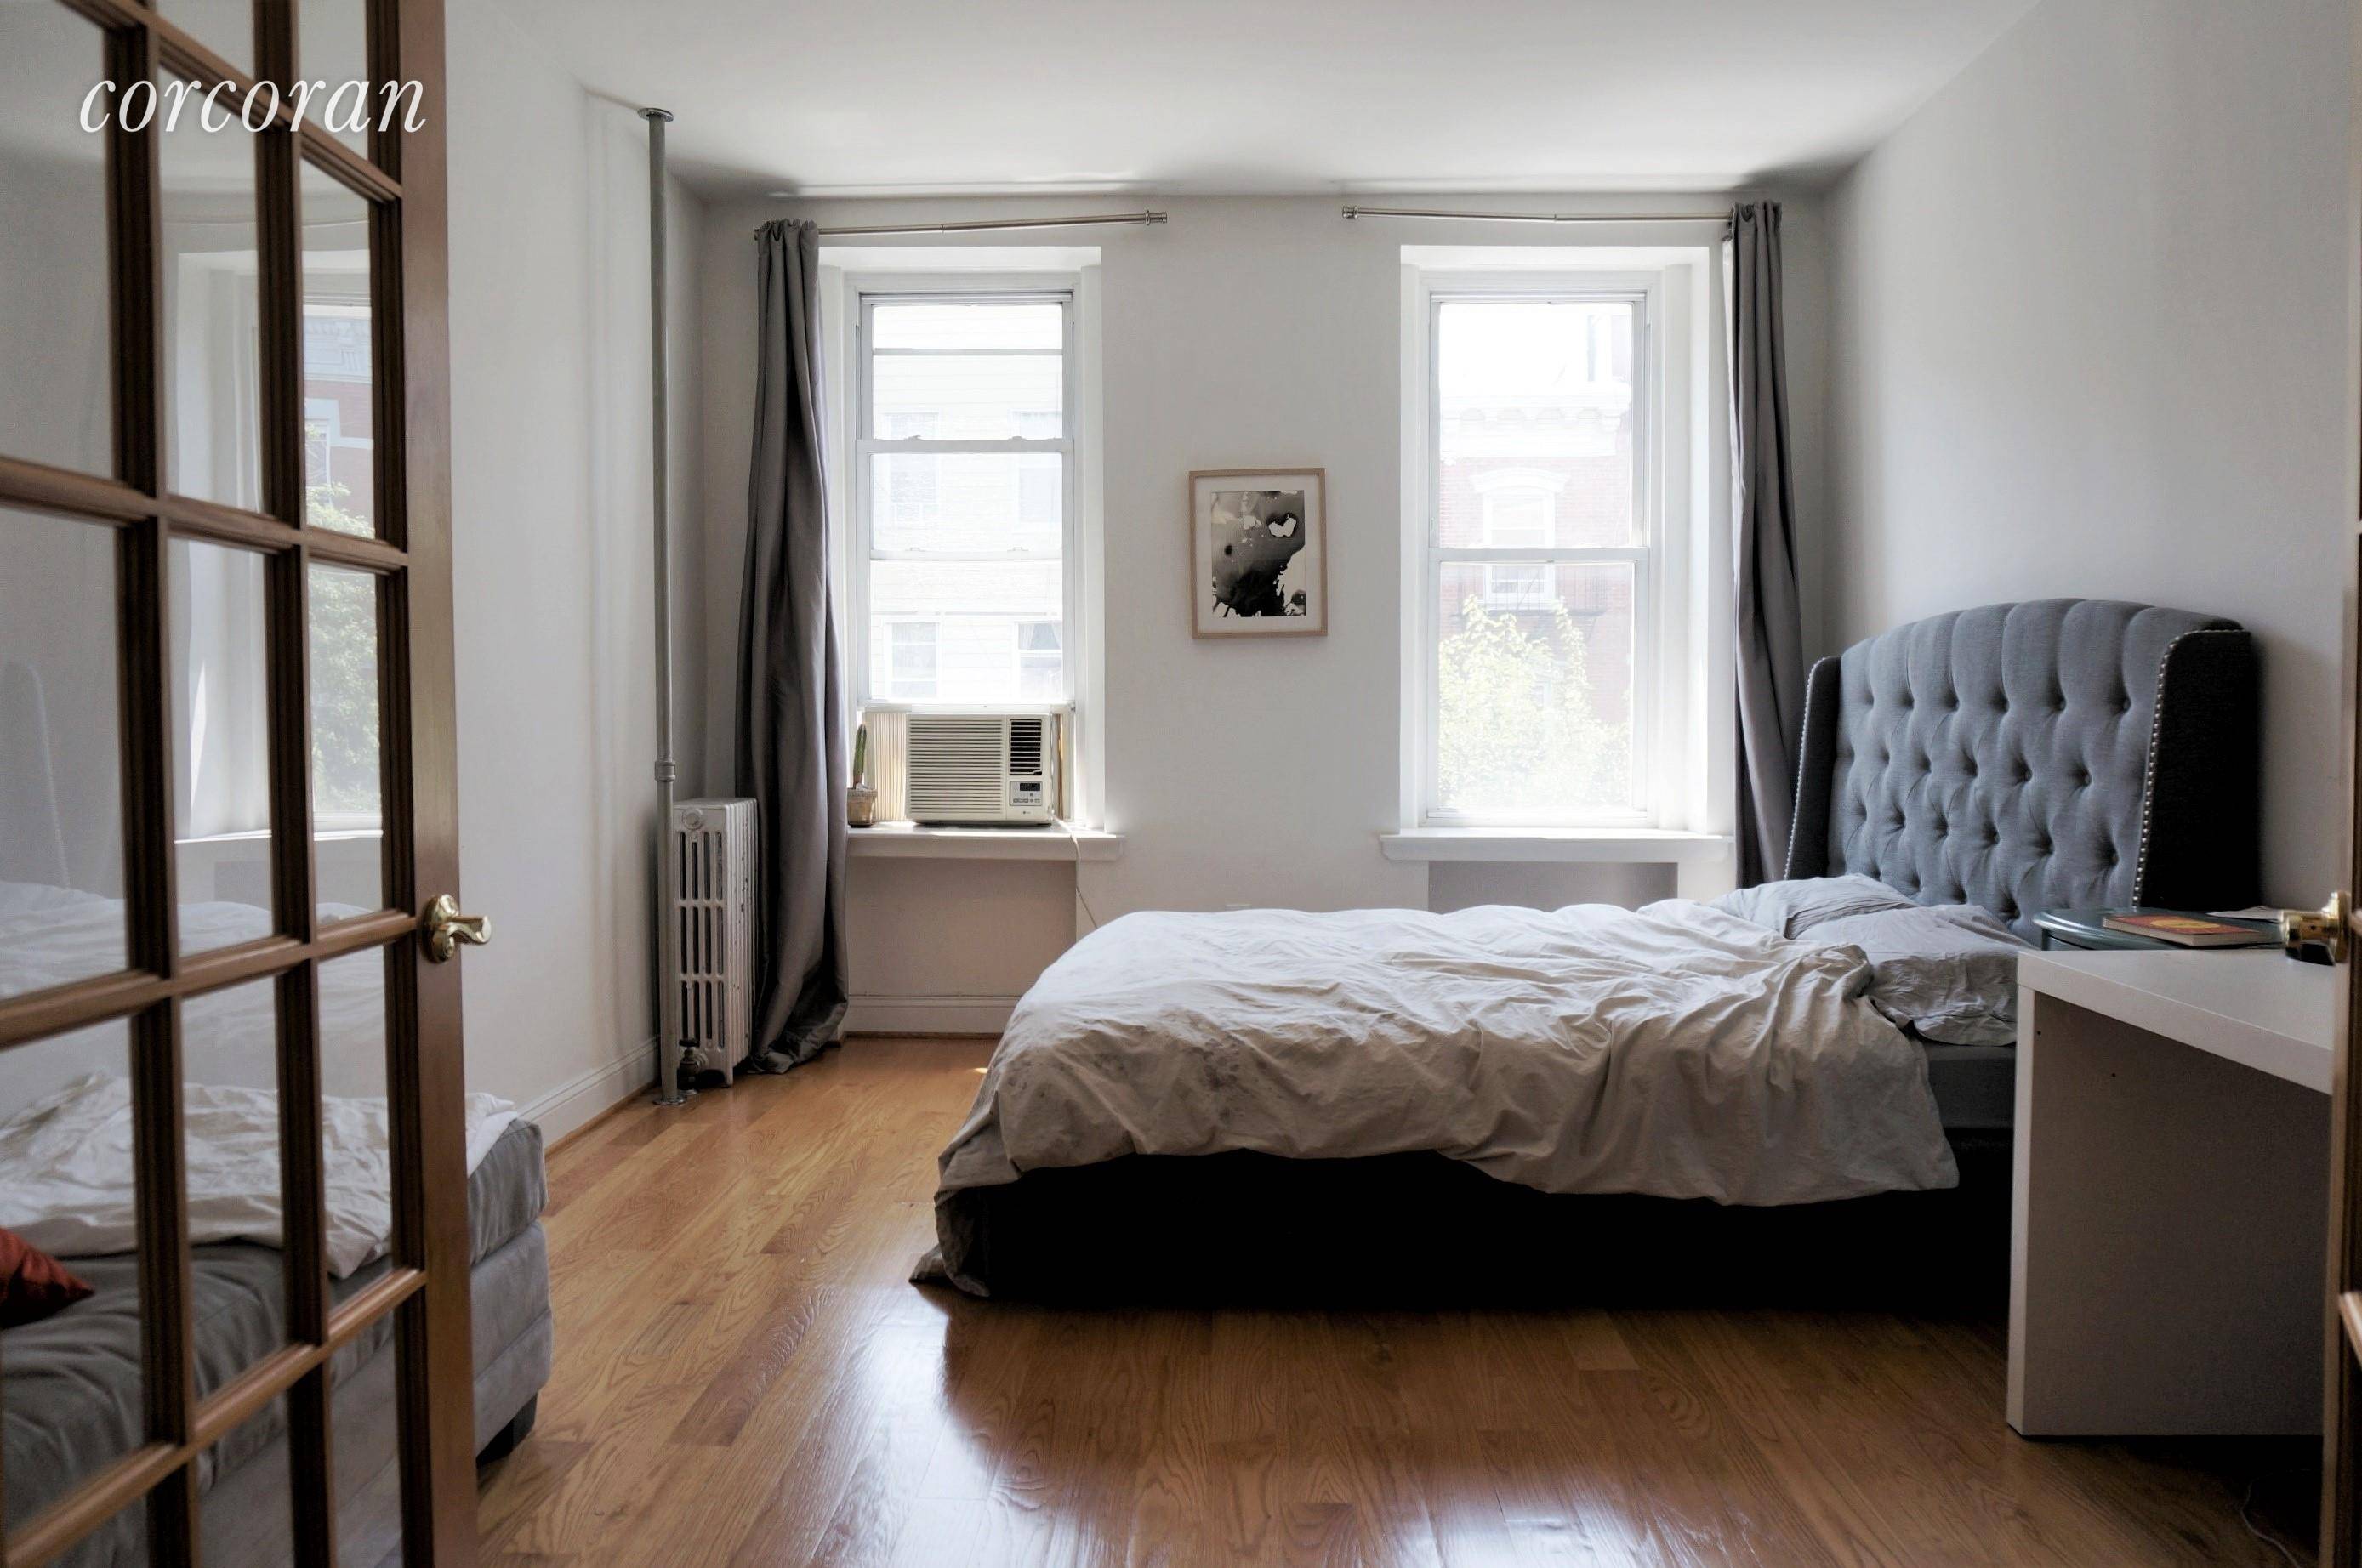 Available for April ! Massive amp ; Charming 4th Floor One Bedroom Floorthrough Apartment on Treelined North 8th Street in the Heart of Northside Williamsburg !